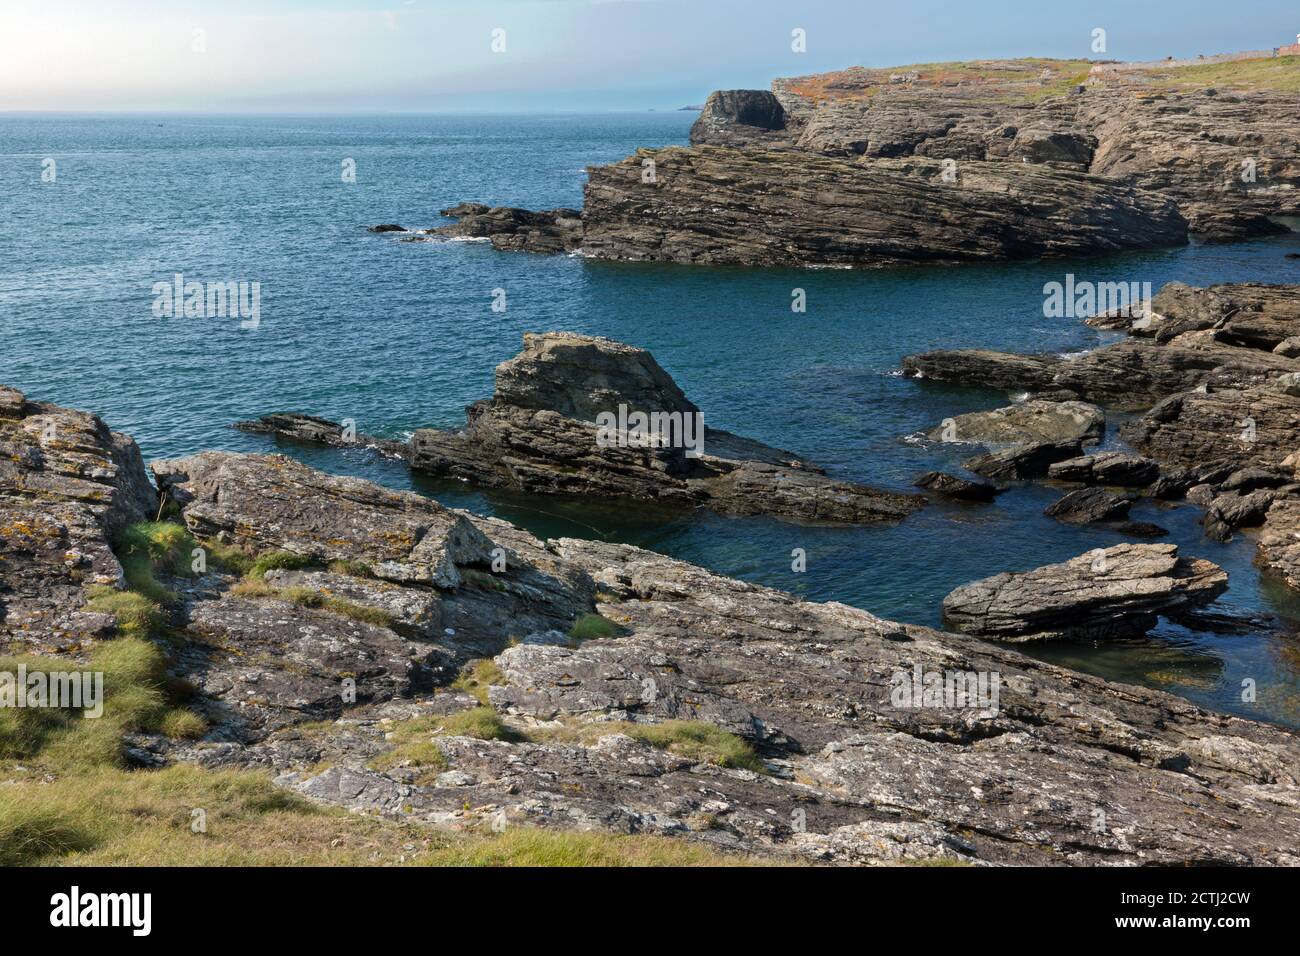 Penrhos Bay near Trearddur on Holy Island, Anglesey, North Wales, is a small cove with dramatic cliffs composed of Precambrian rock. Stock Photo